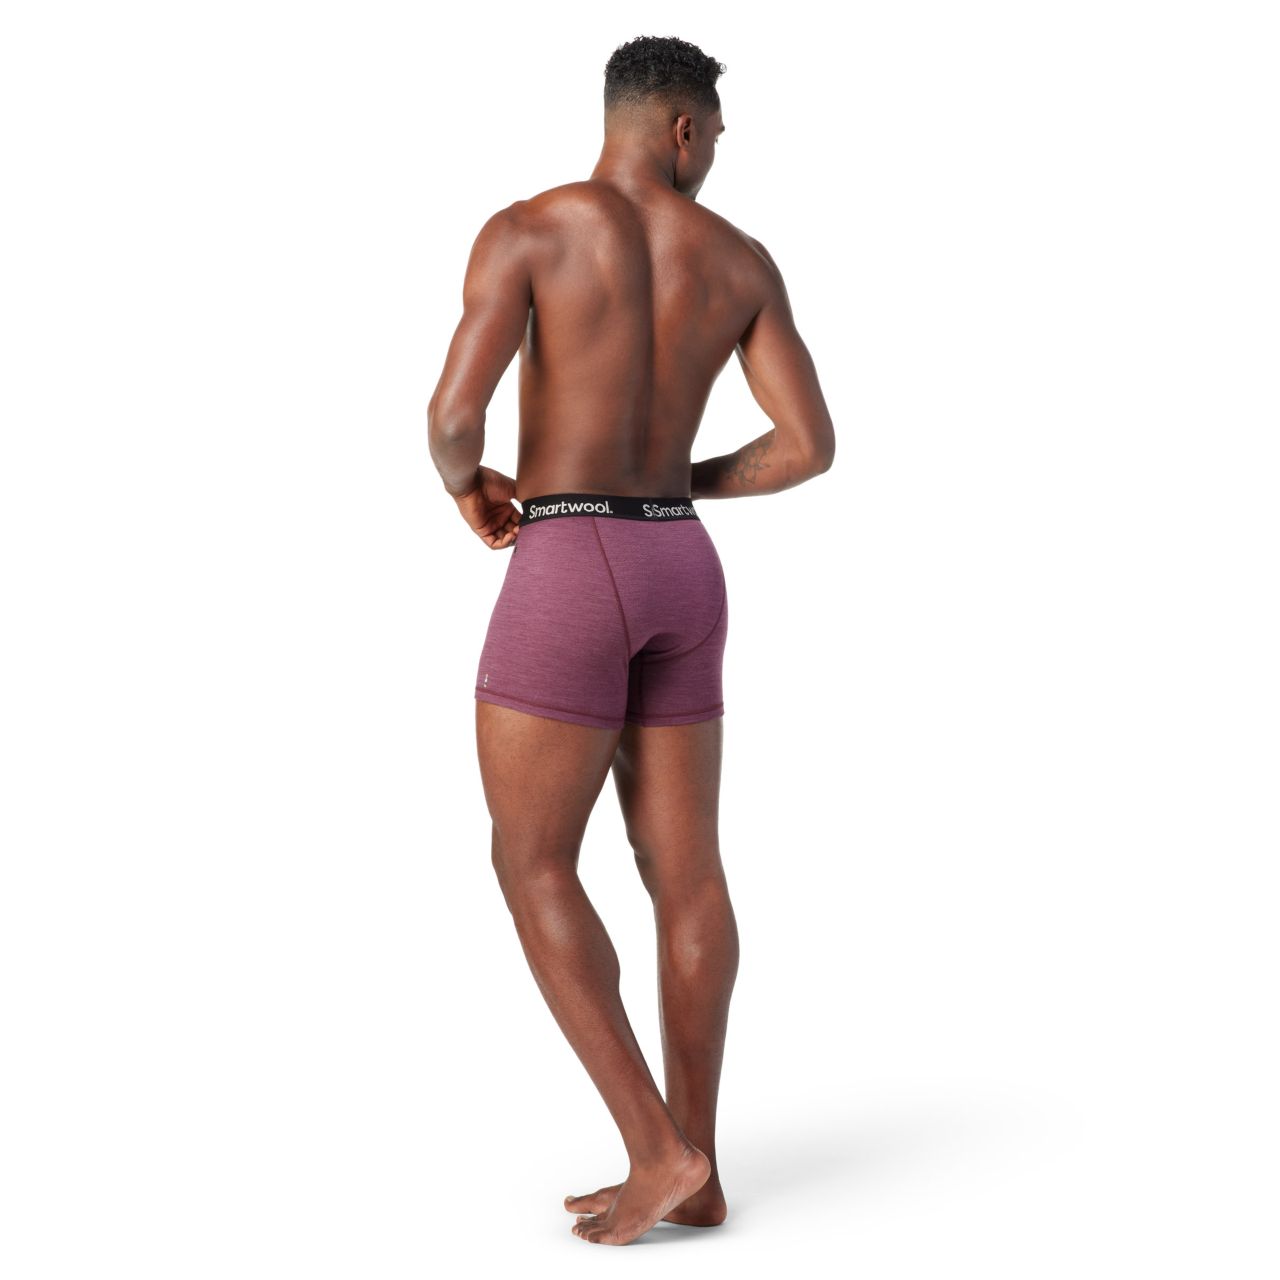 Smartwool M's Merino Print Boxer Brief Boxed - Quest Outdoors